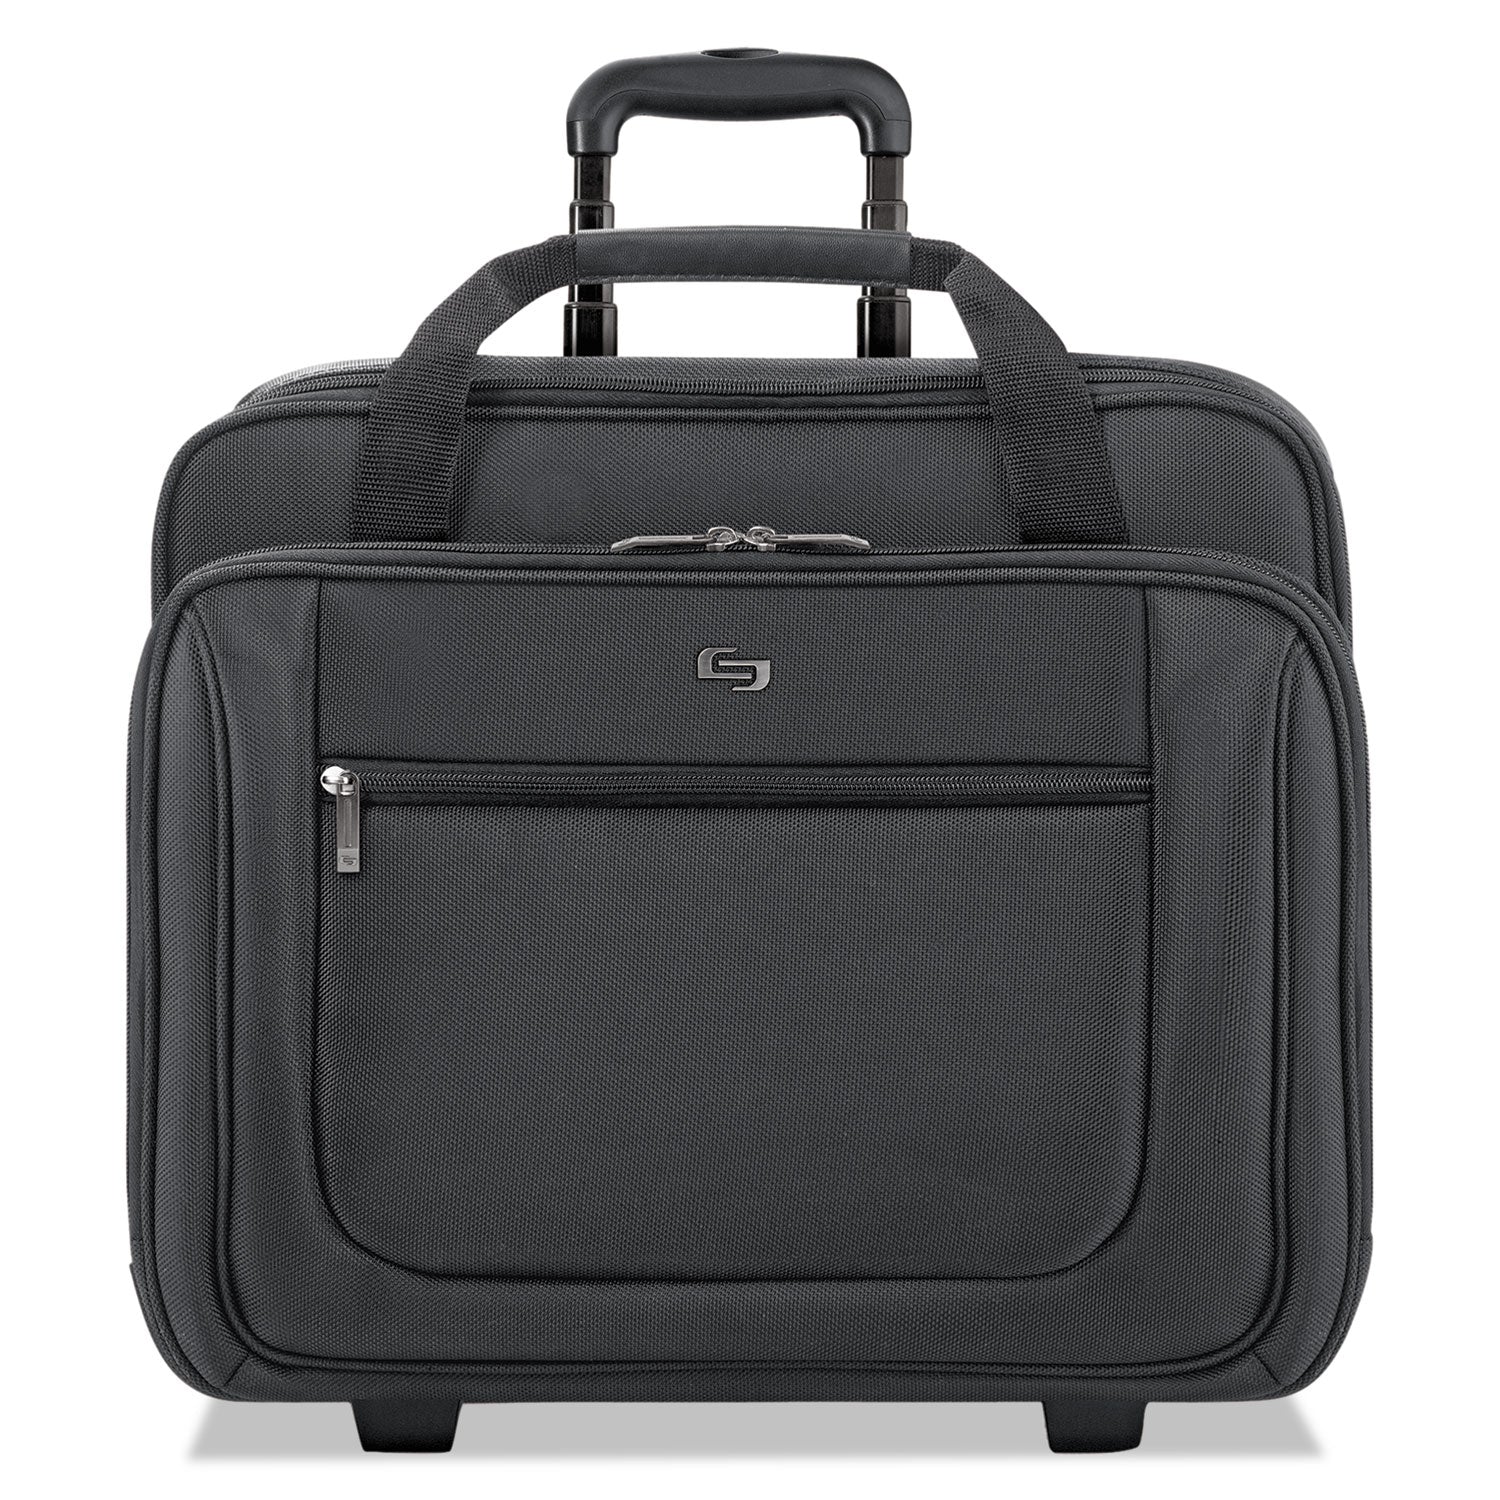 Classic Rolling Case, Fits Devices Up to 17.3", Polyester, 17.5 x 9 x 14, Black - 